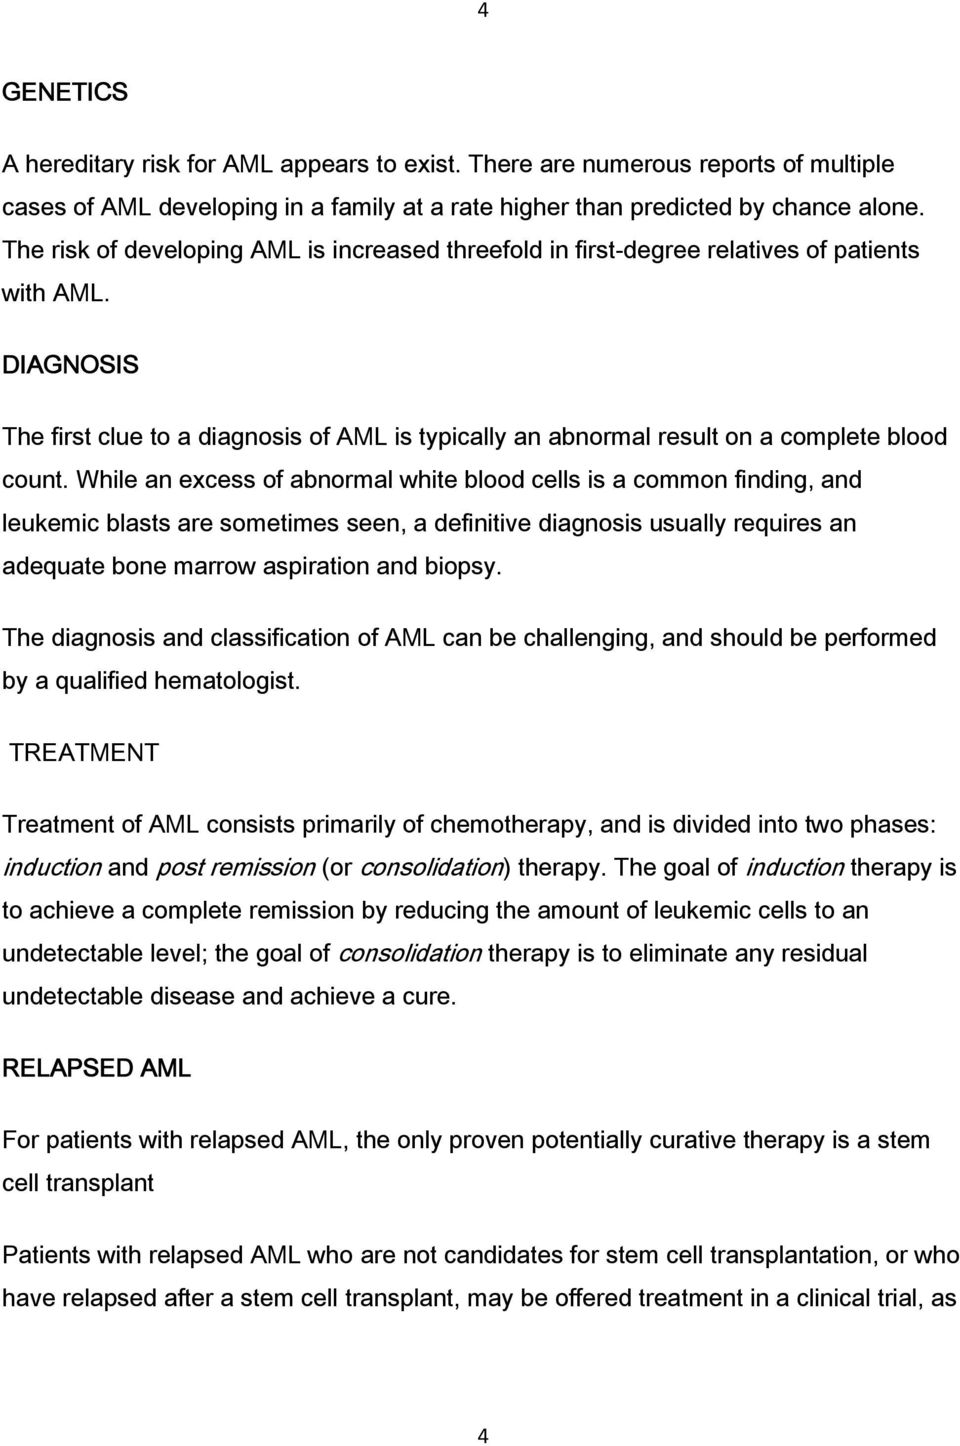 DIAGNOSIS The first clue to a diagnosis of AML is typically an abnormal result on a complete blood count.